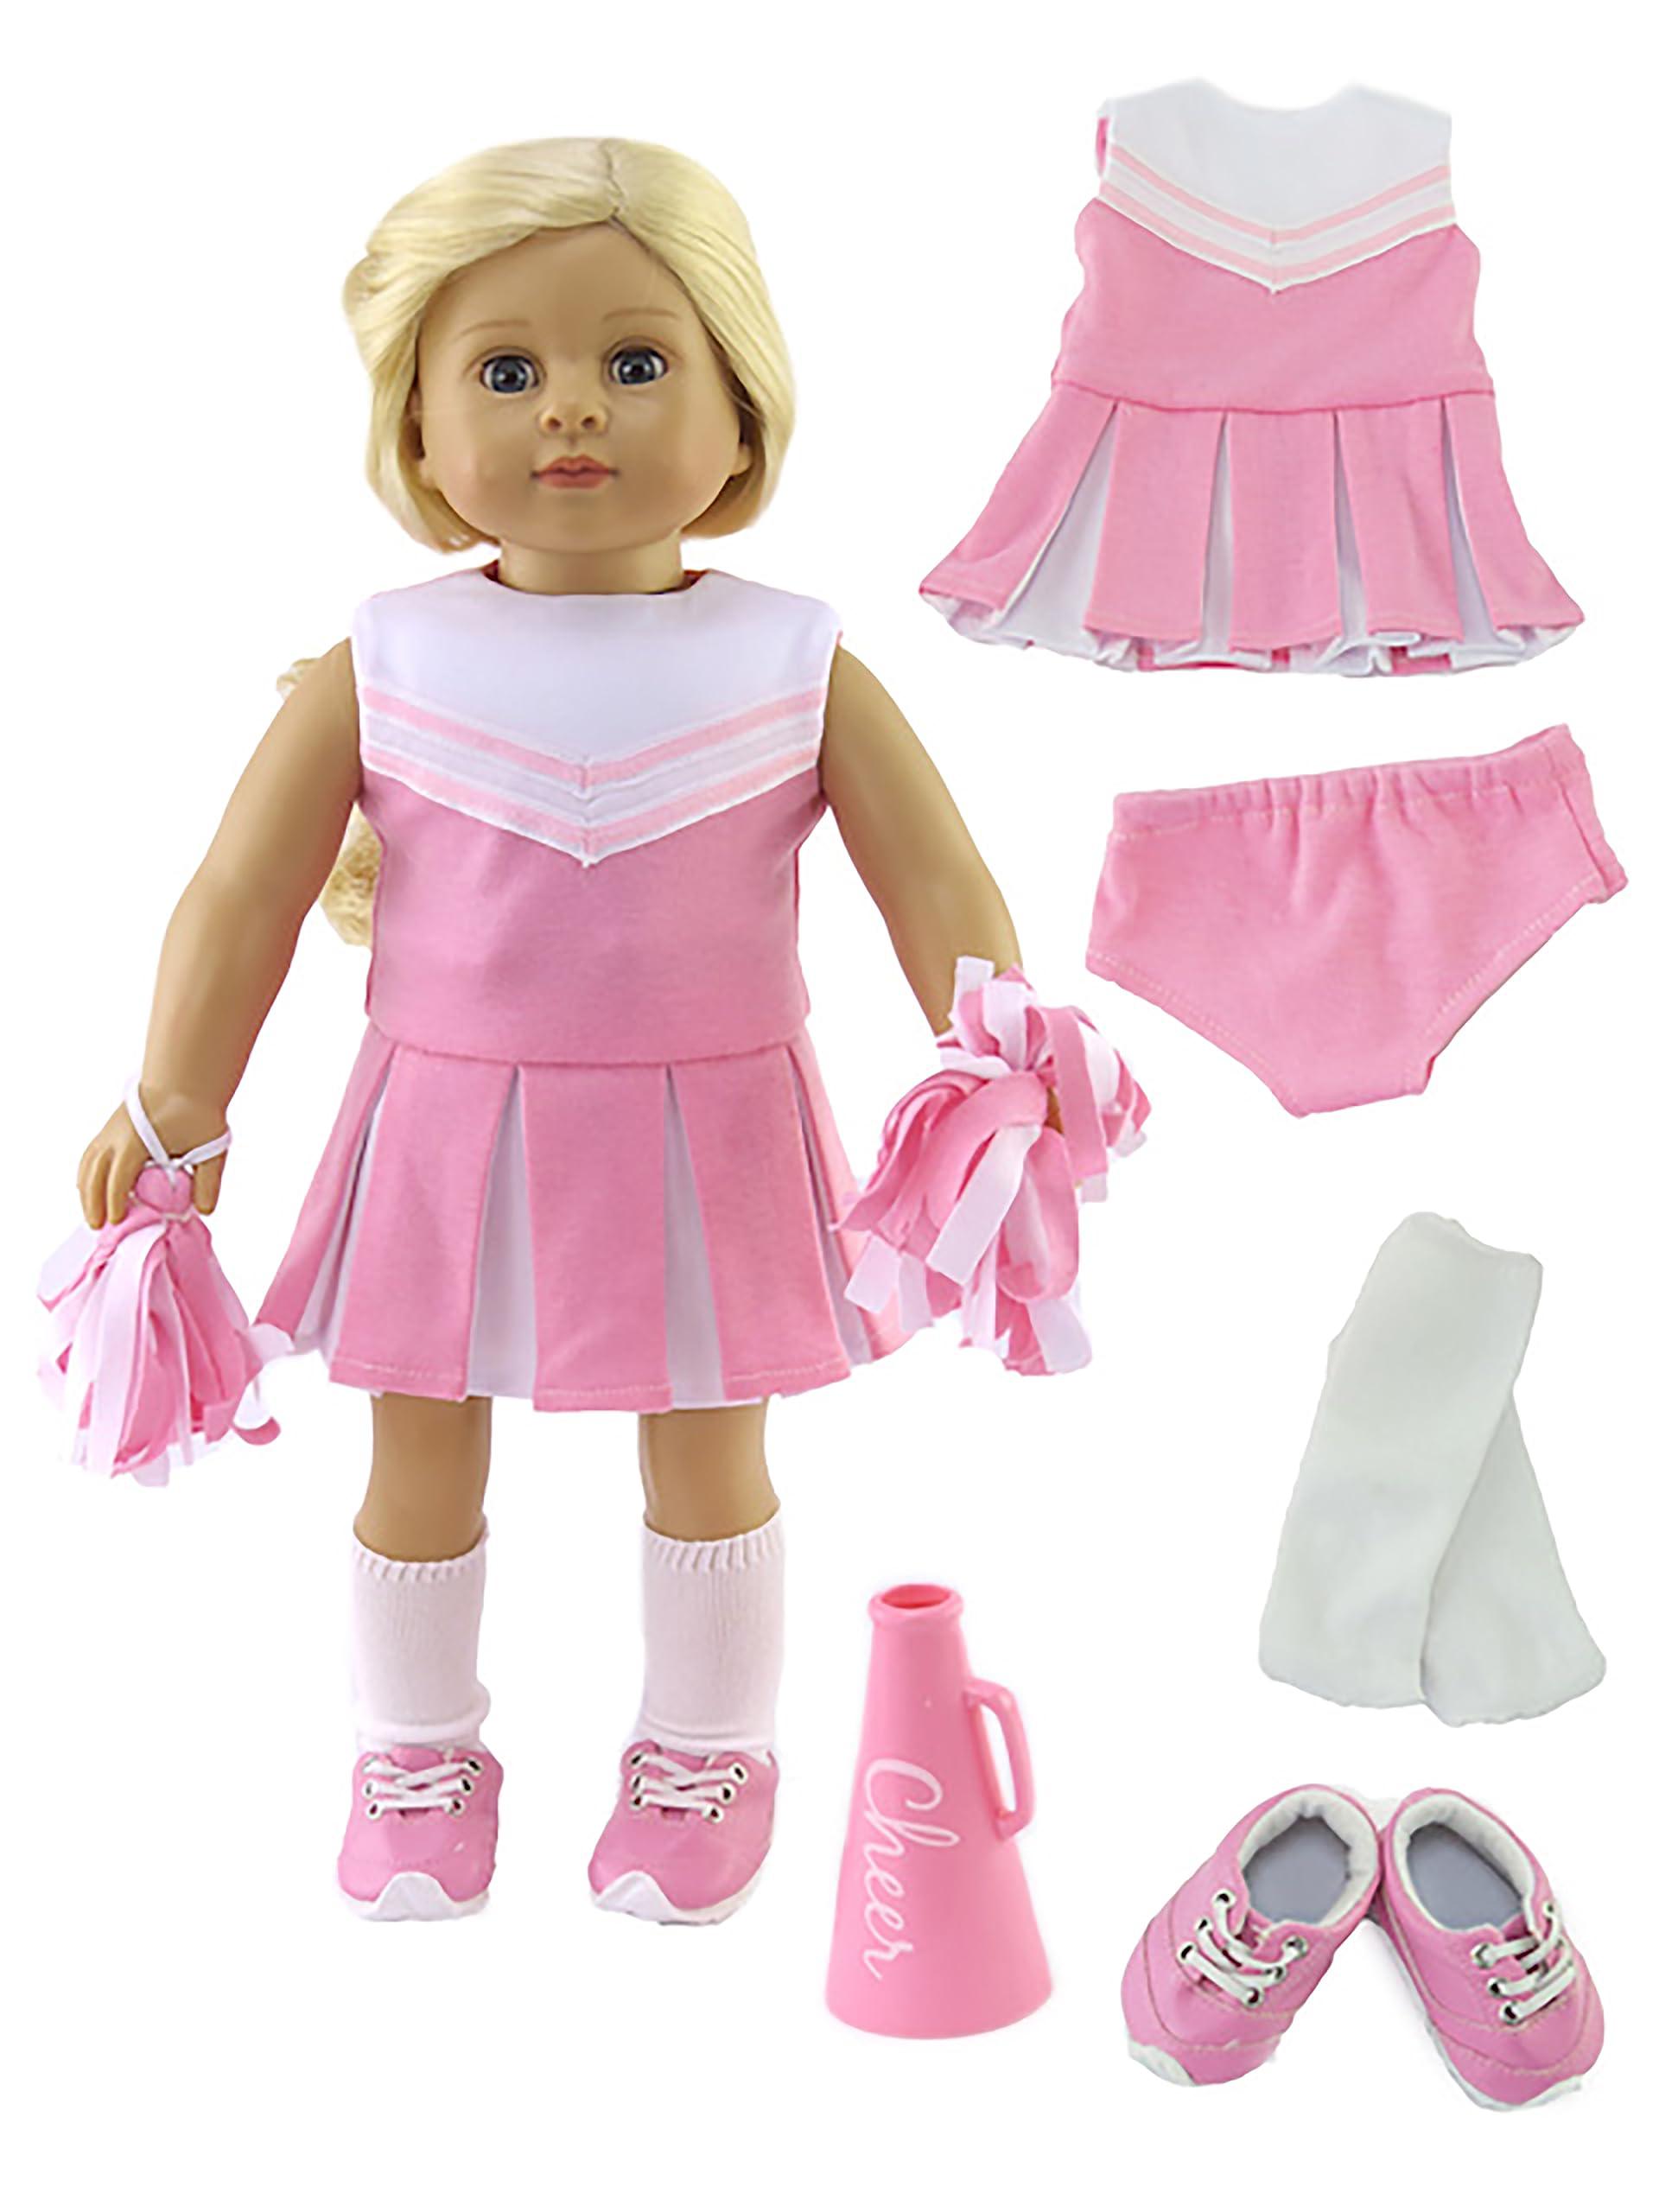 american fashion world pink cheerleader uniform with shoes and